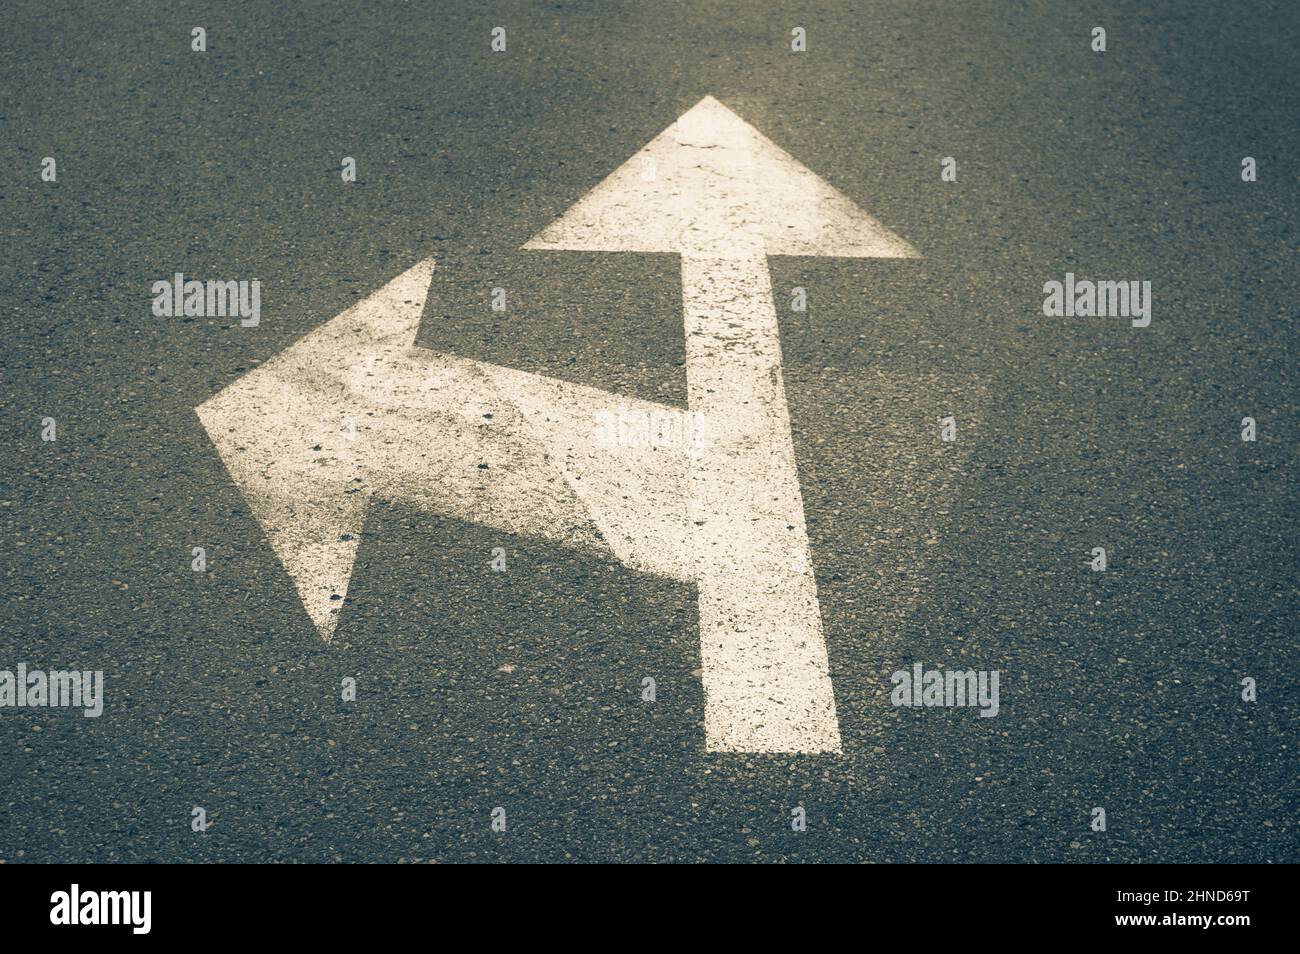 Direction sign on asphalt showing allowed directions - turn left and go straight Stock Photo